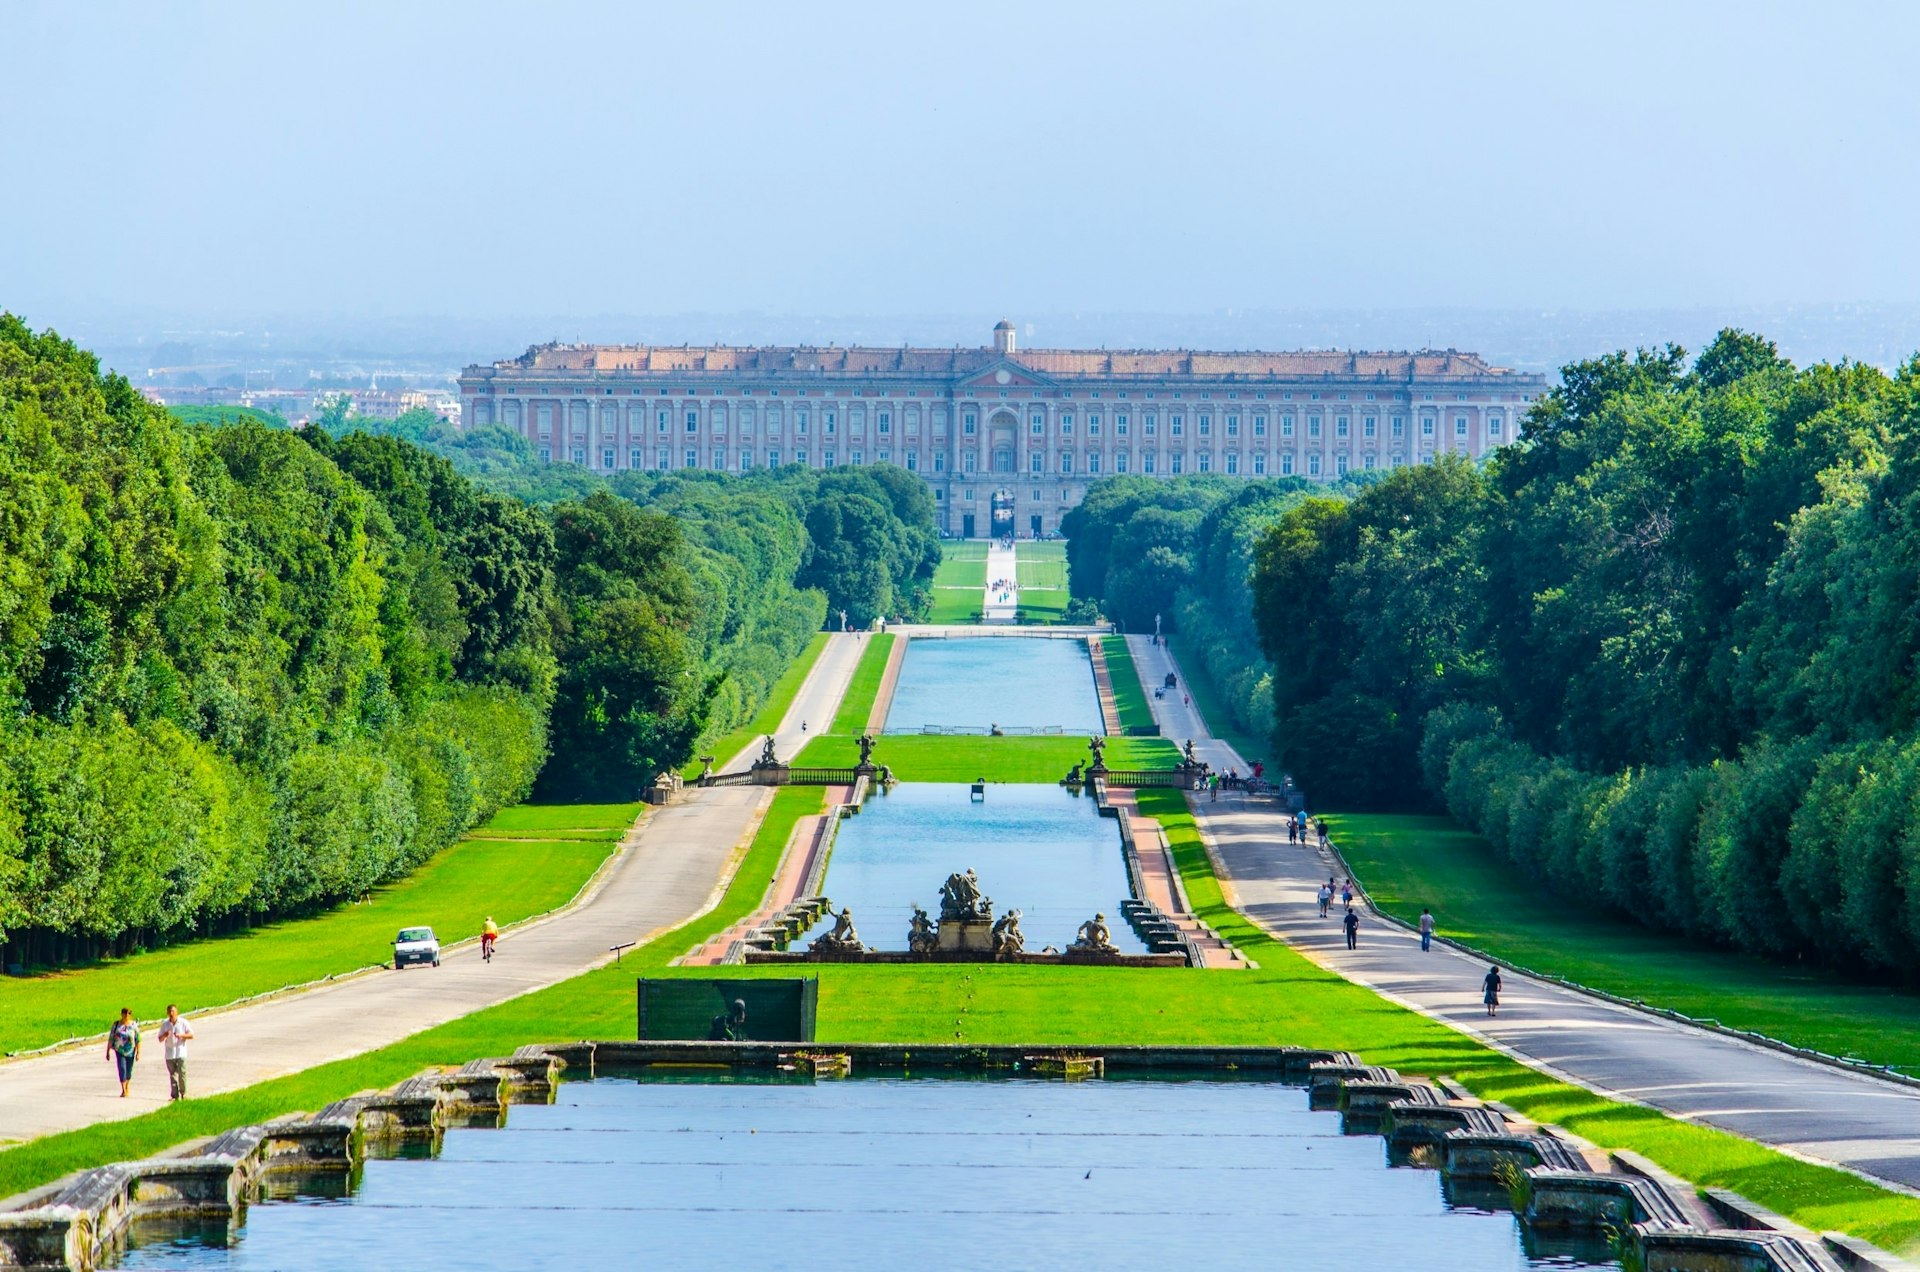 A view of the Palazzo Reale, Caserta, Calabria, Italy